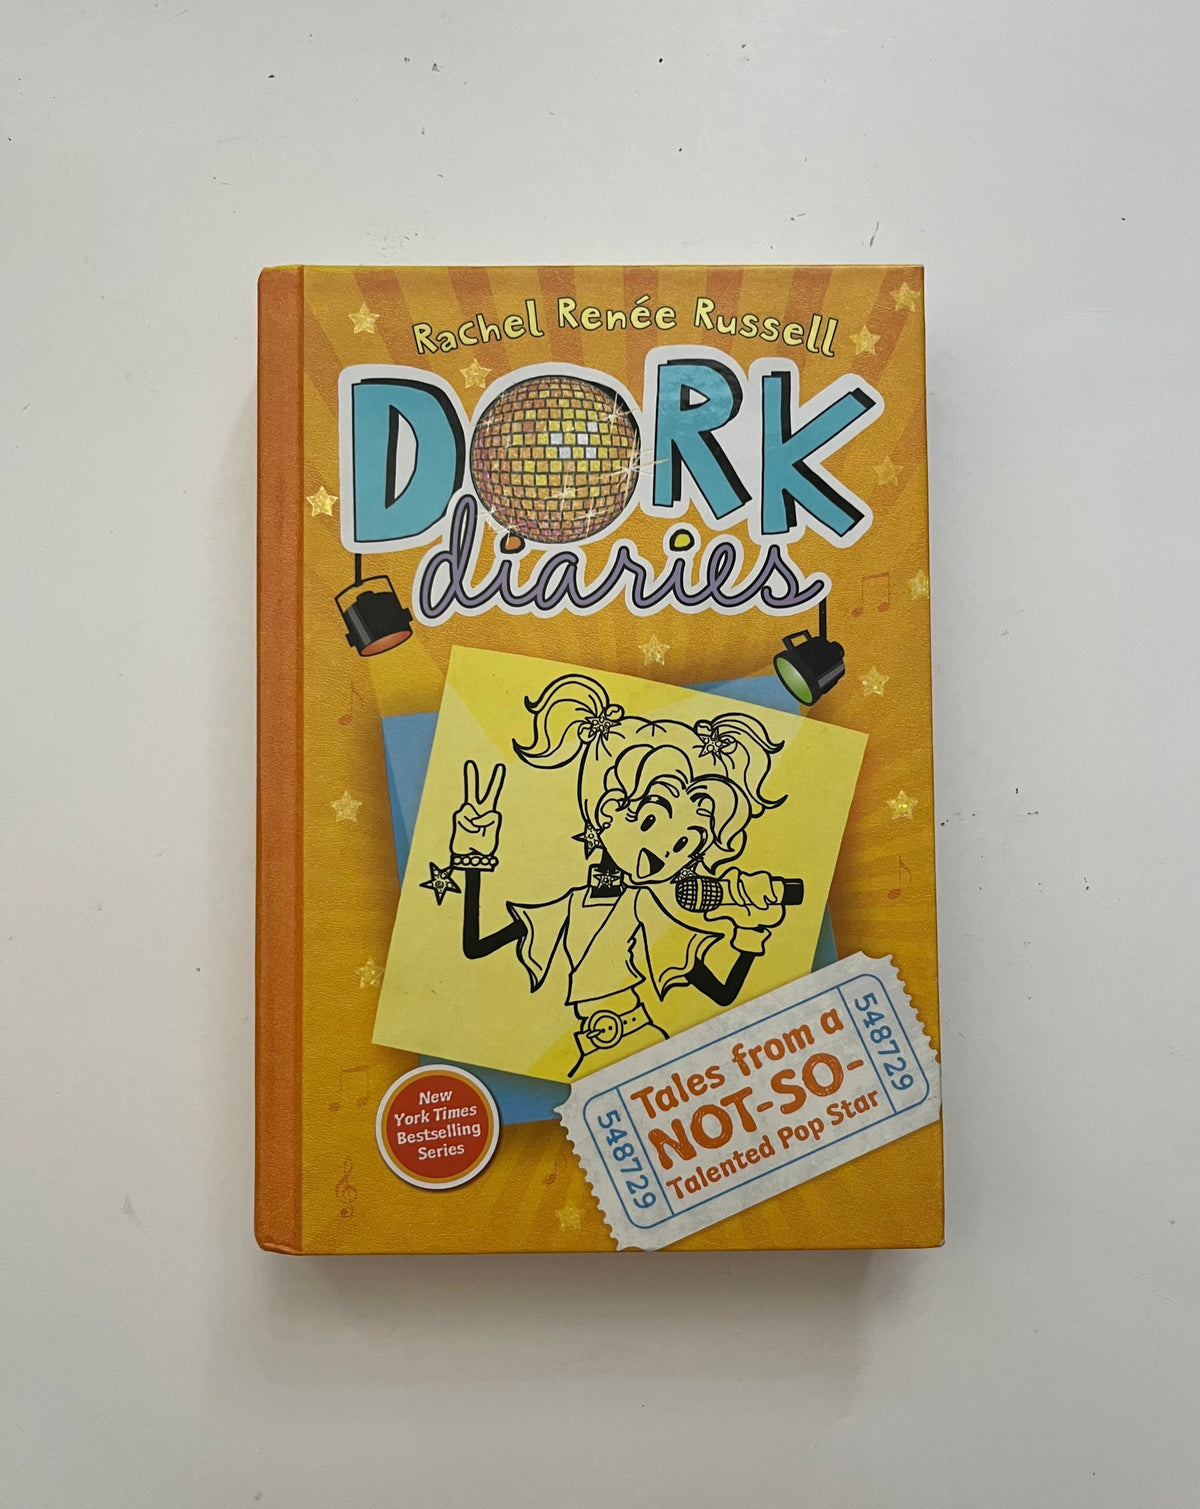 Dork Diaries: Tales from a Not-So-Perfect Pop Star by Rachel Renee Russell